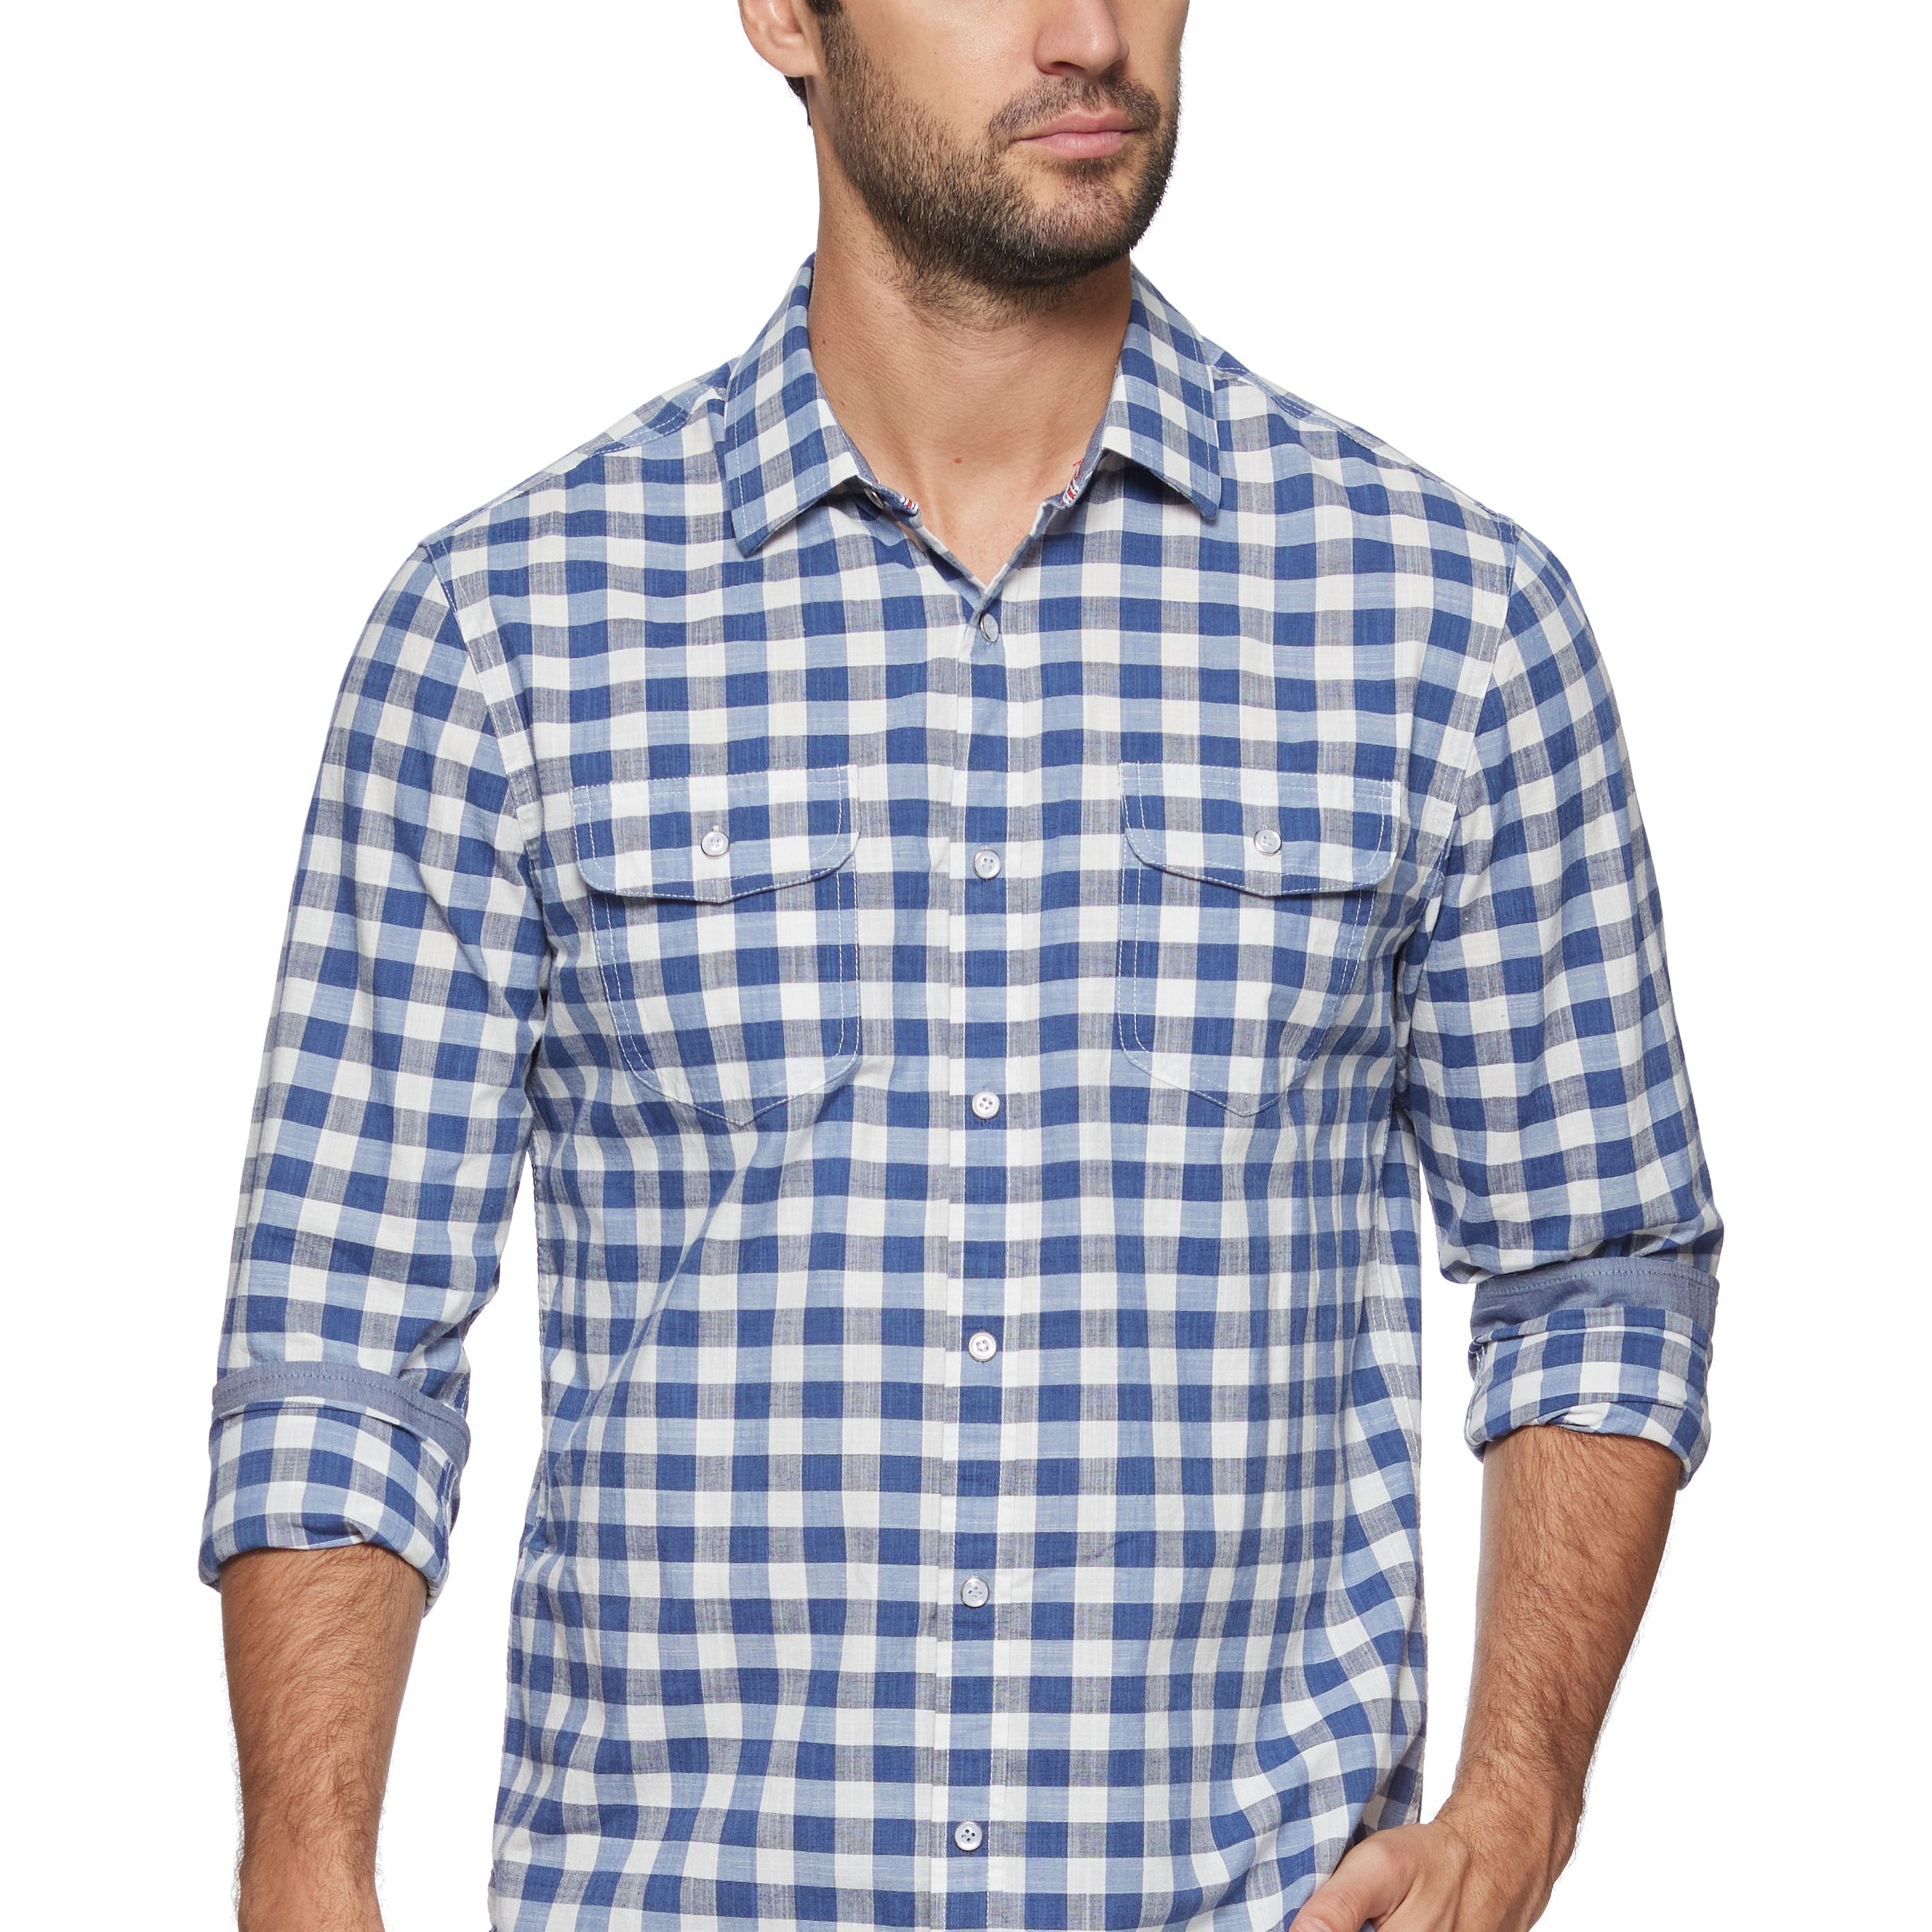 Harbuck Slub Gingham Shirt-Men's Tops-Vixen Collection, Day Spa and Women's Boutique Located in Seattle, Washington